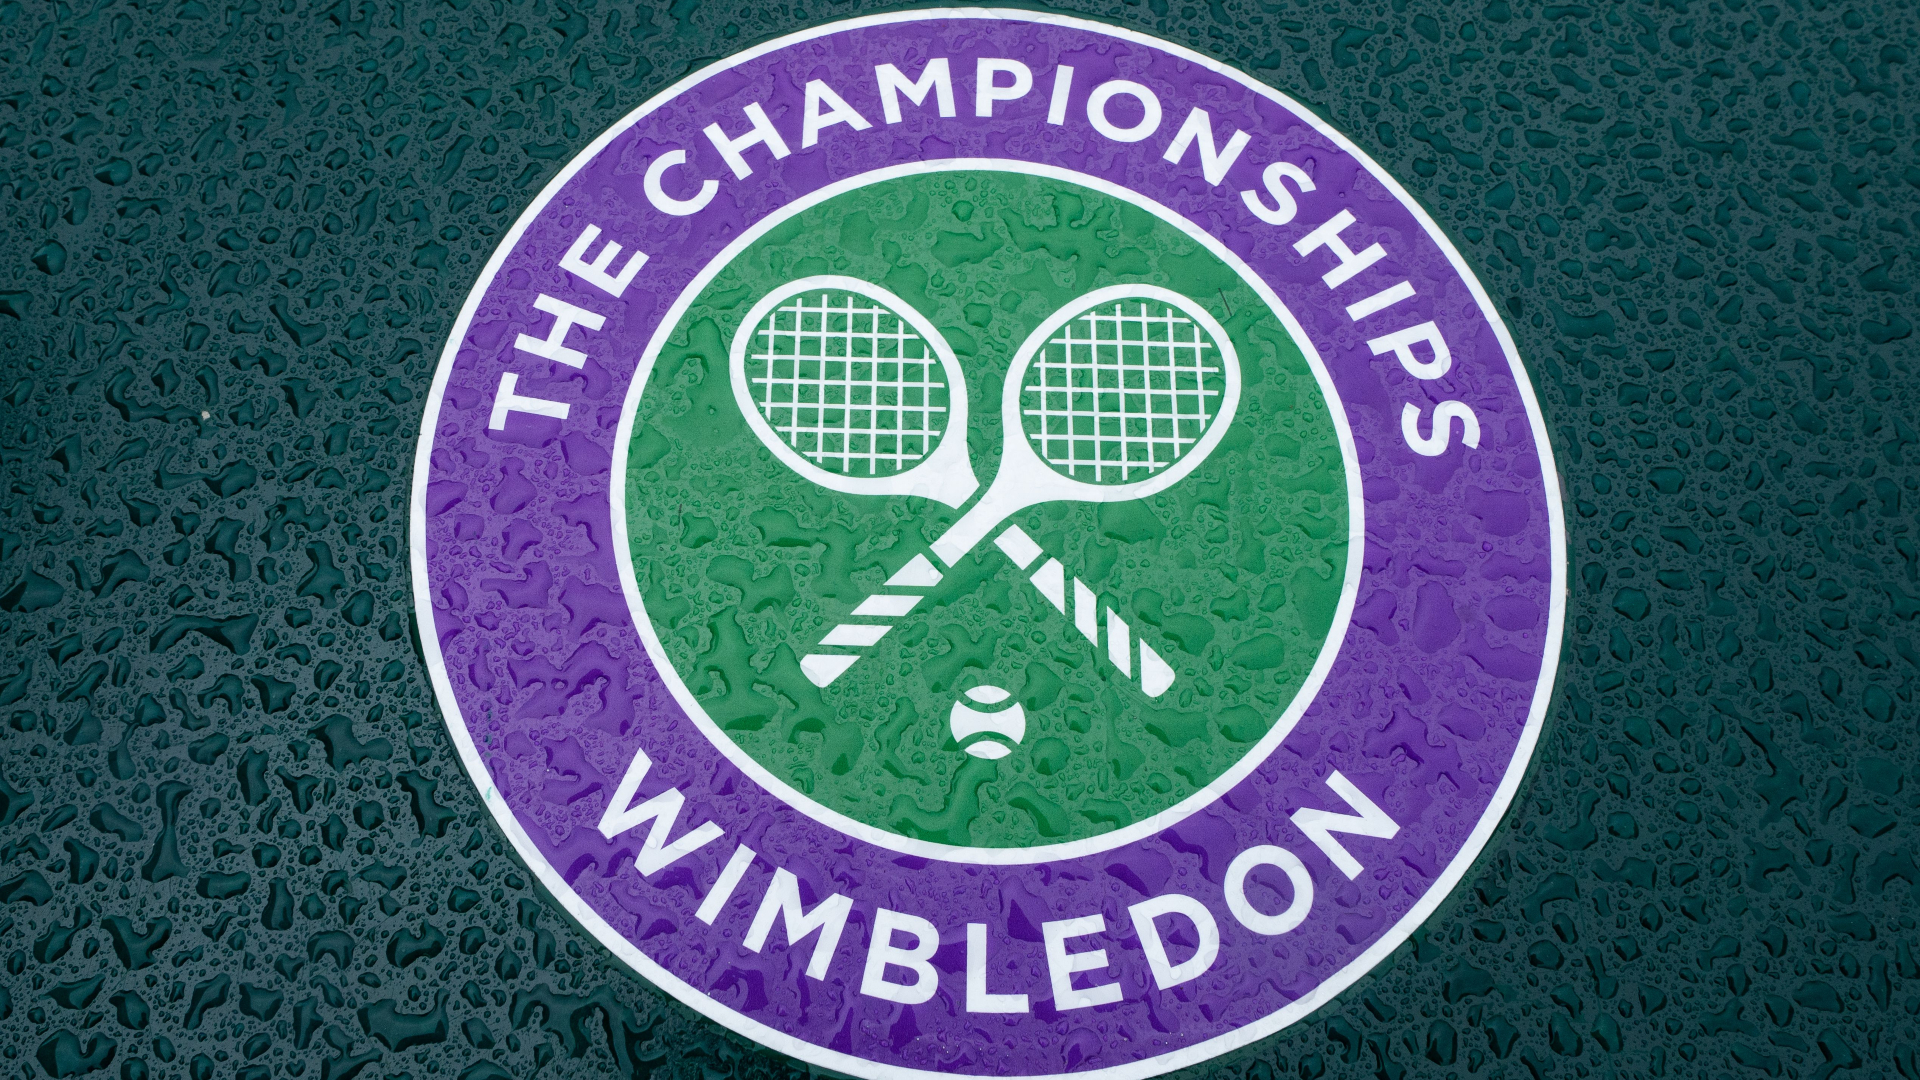 How to watch Wimbledon 2021 What to Watch